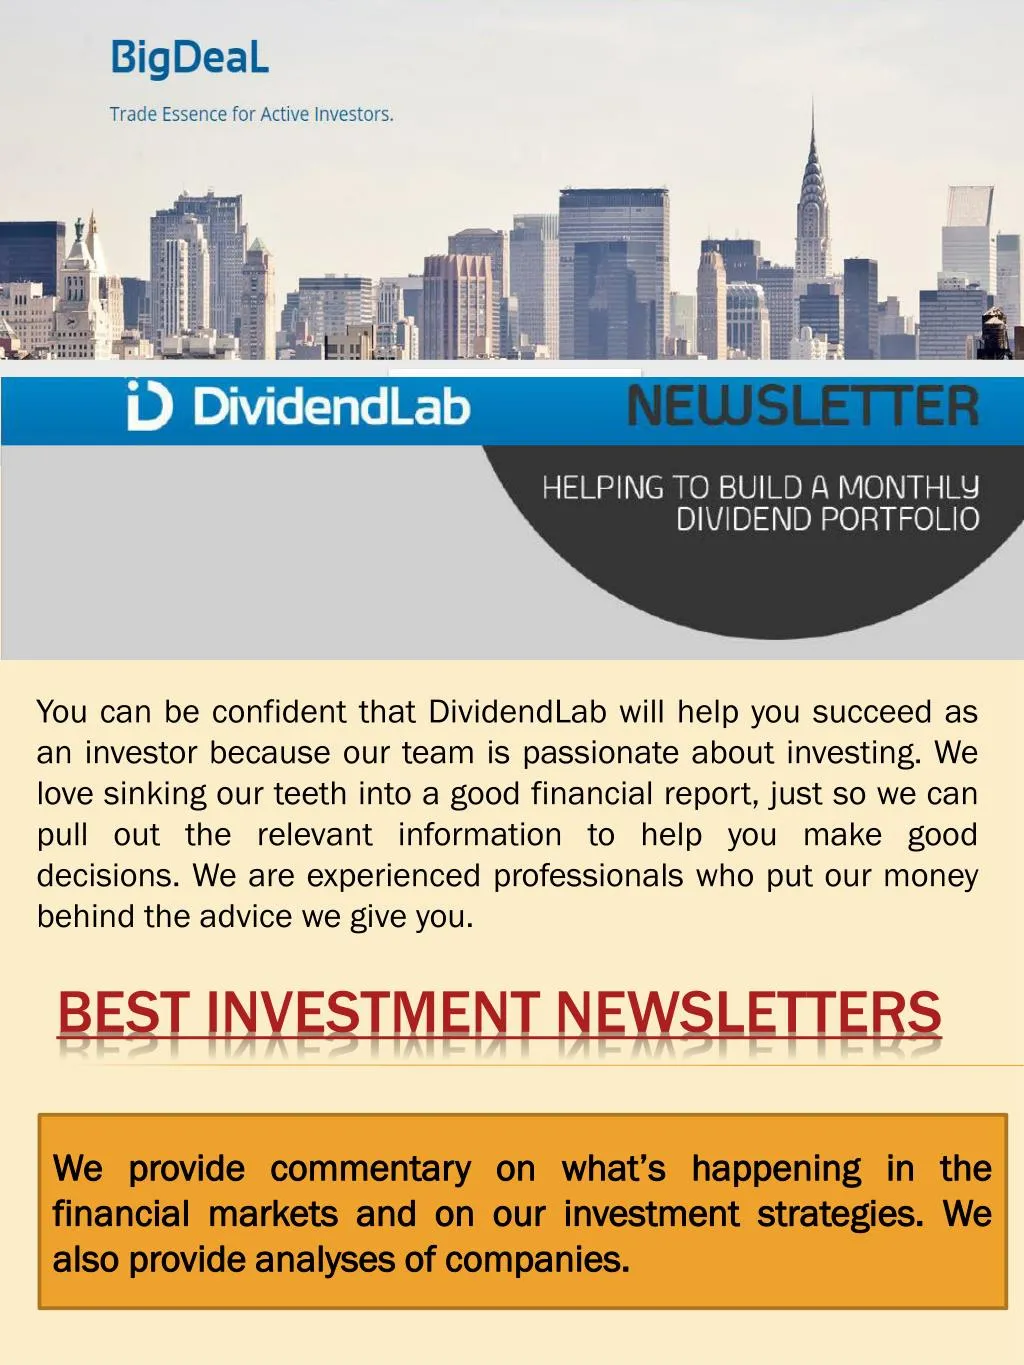 PPT Best Investment Newsletters PowerPoint Presentation, free